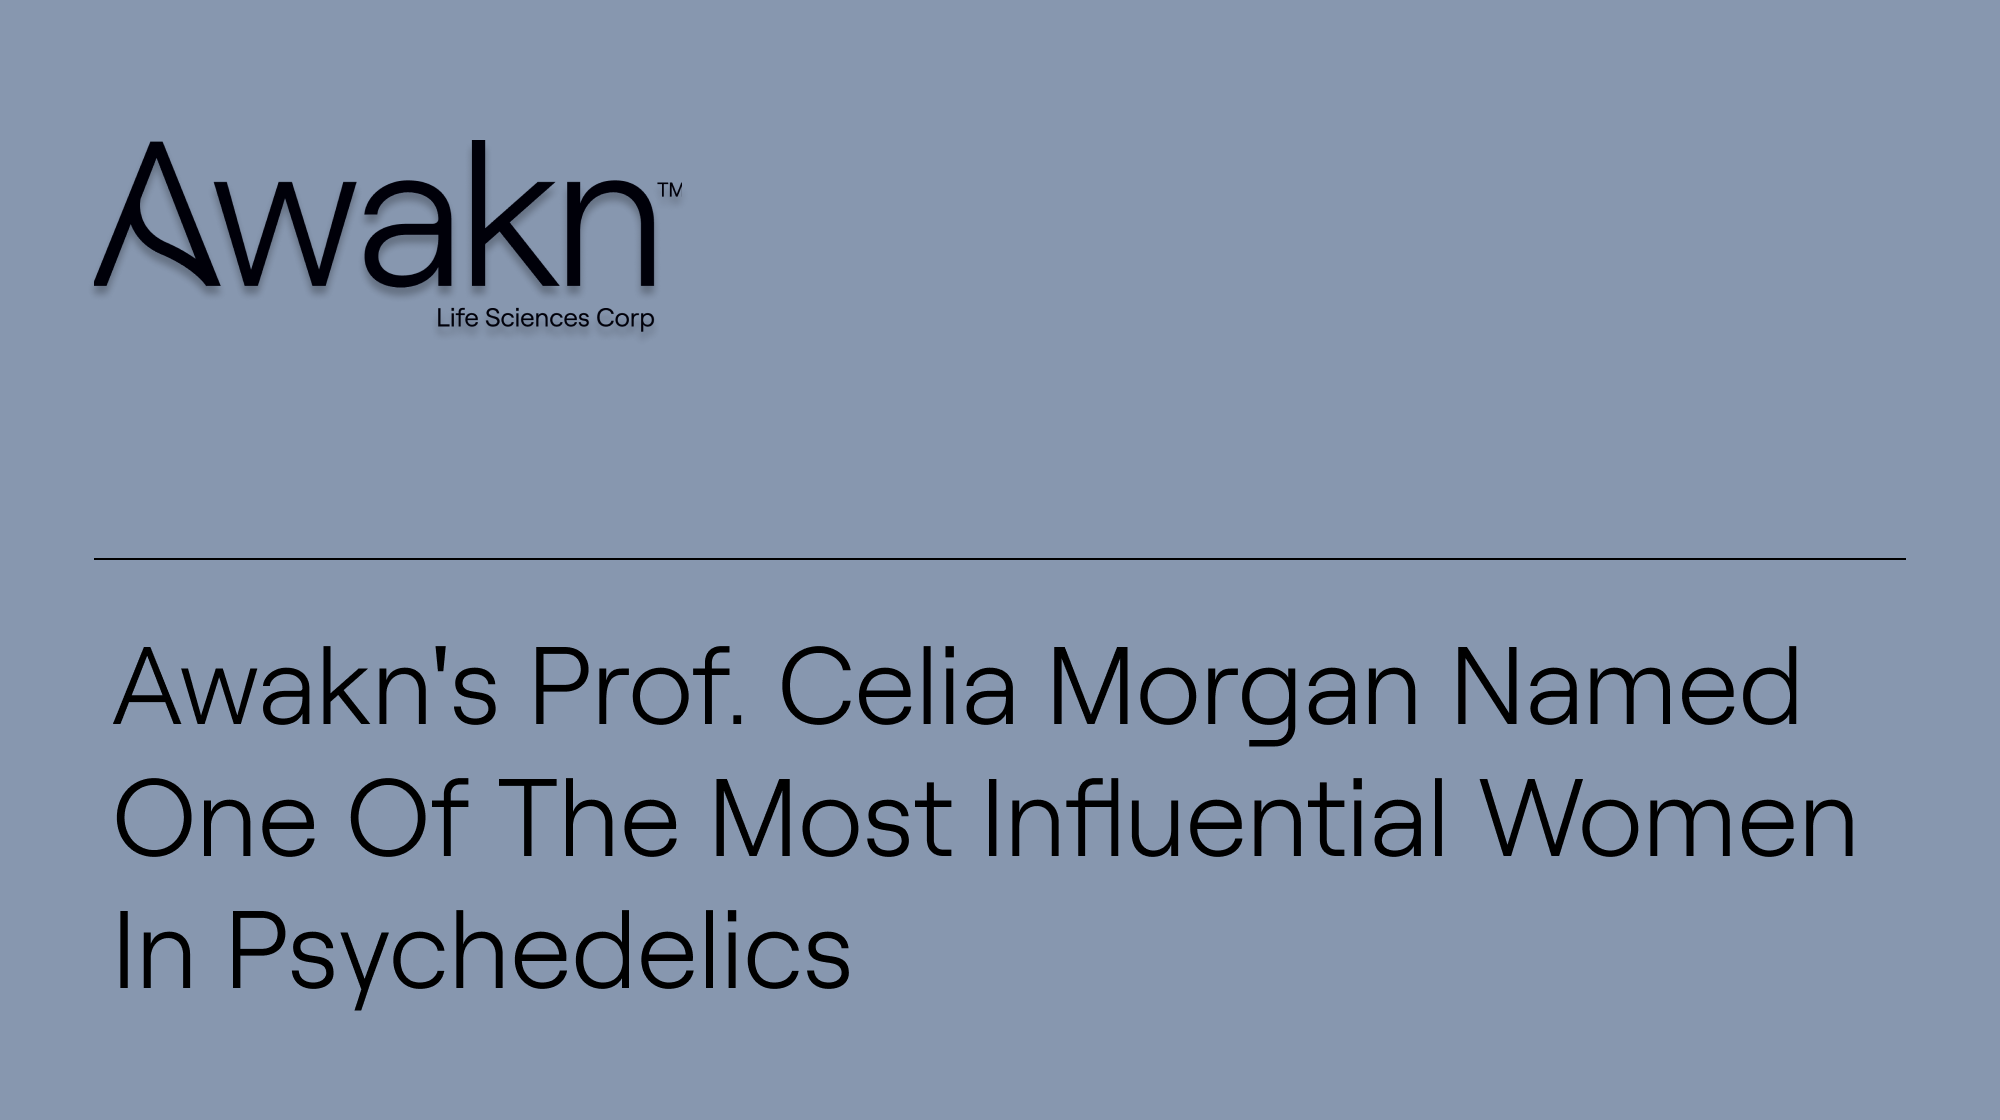 Awakn Life Sciences’ Professor Celia Morgan Named One Of The Most Influential Women In The Psychedelics Industry